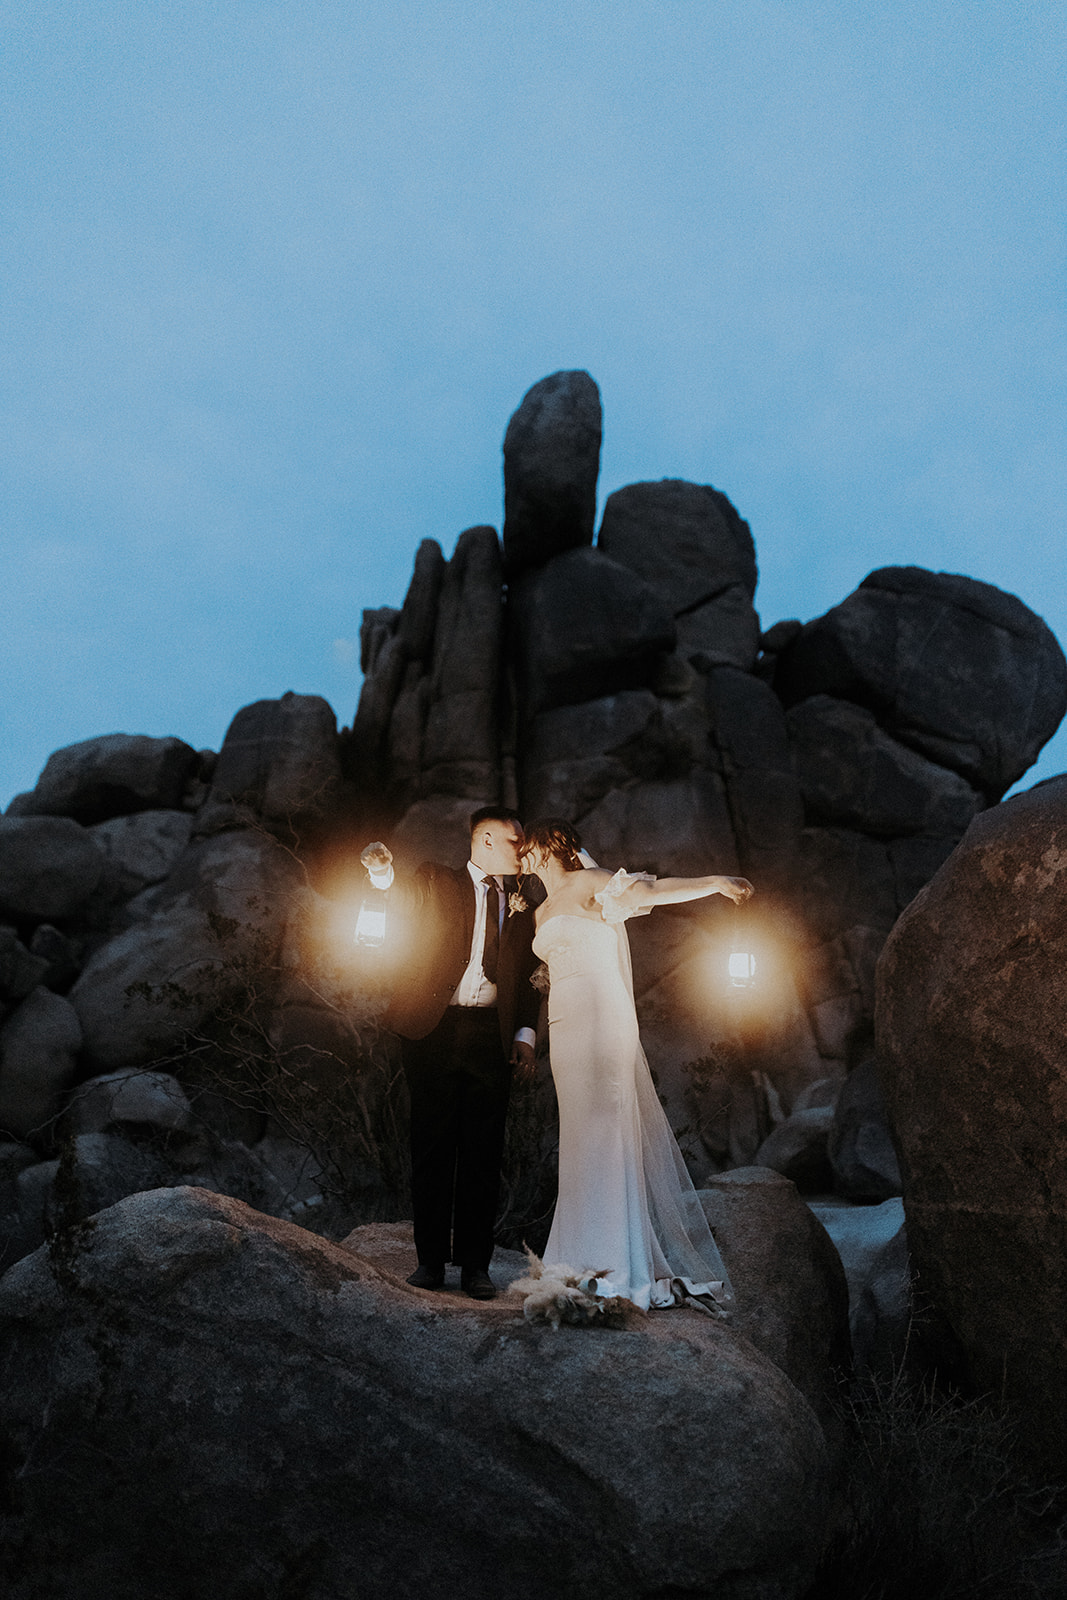 A wedding couple in Joshua Tree National Park at night holding lanterns and kissing.